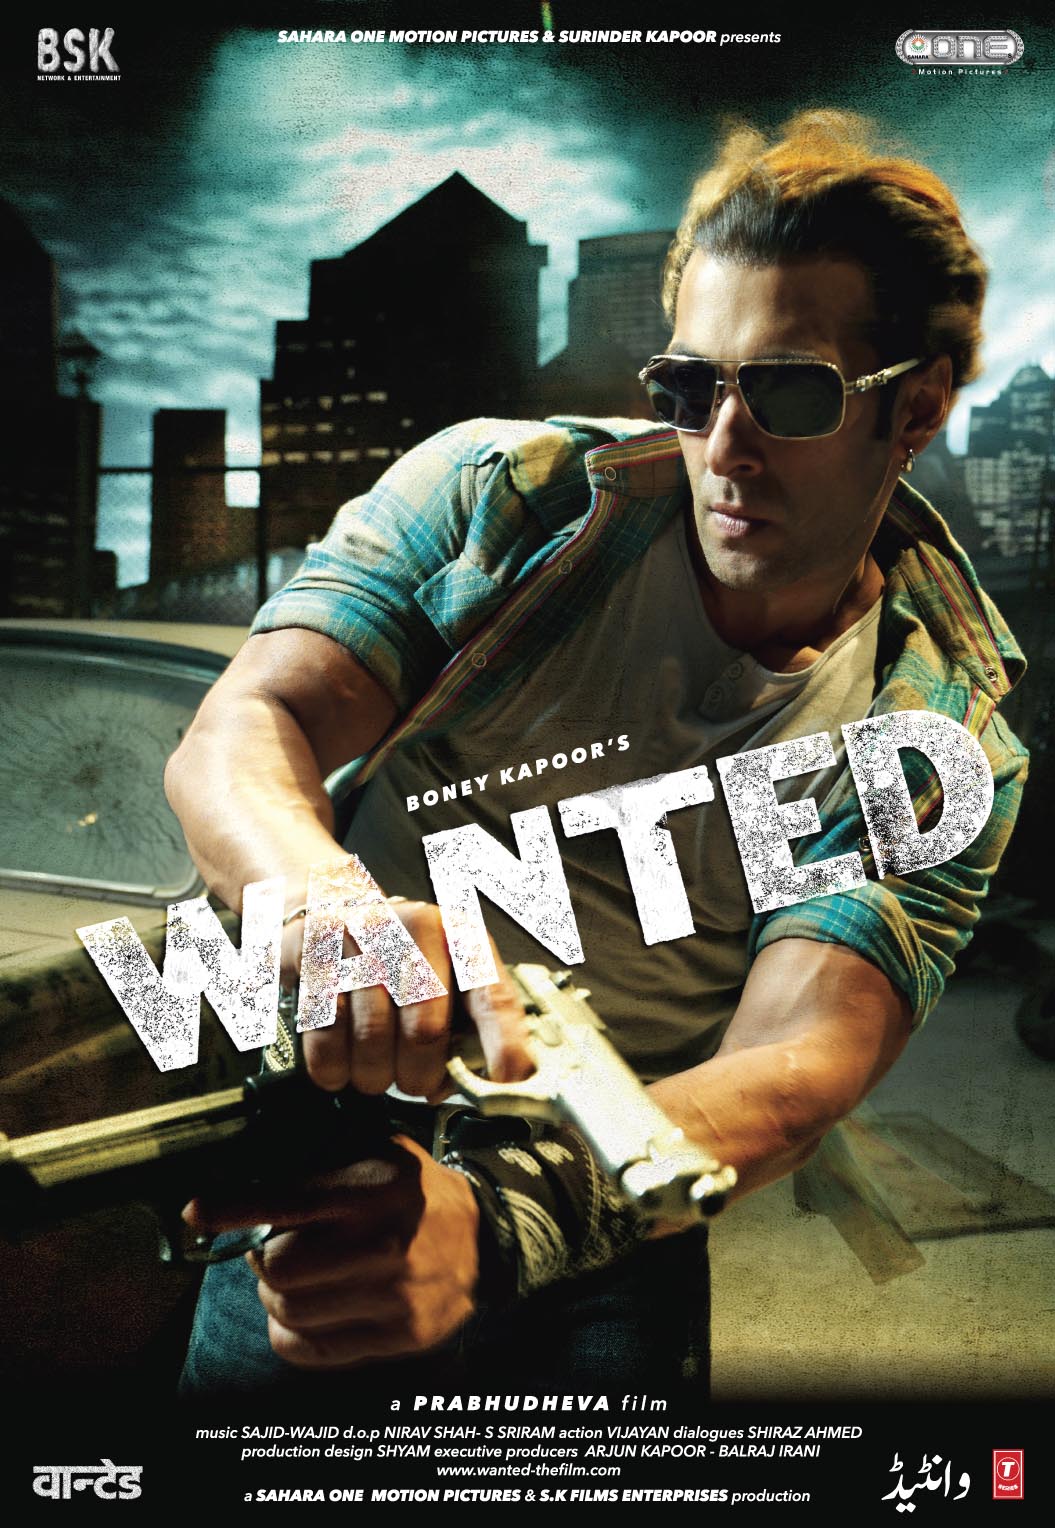 Wanted (Hint Filmi)